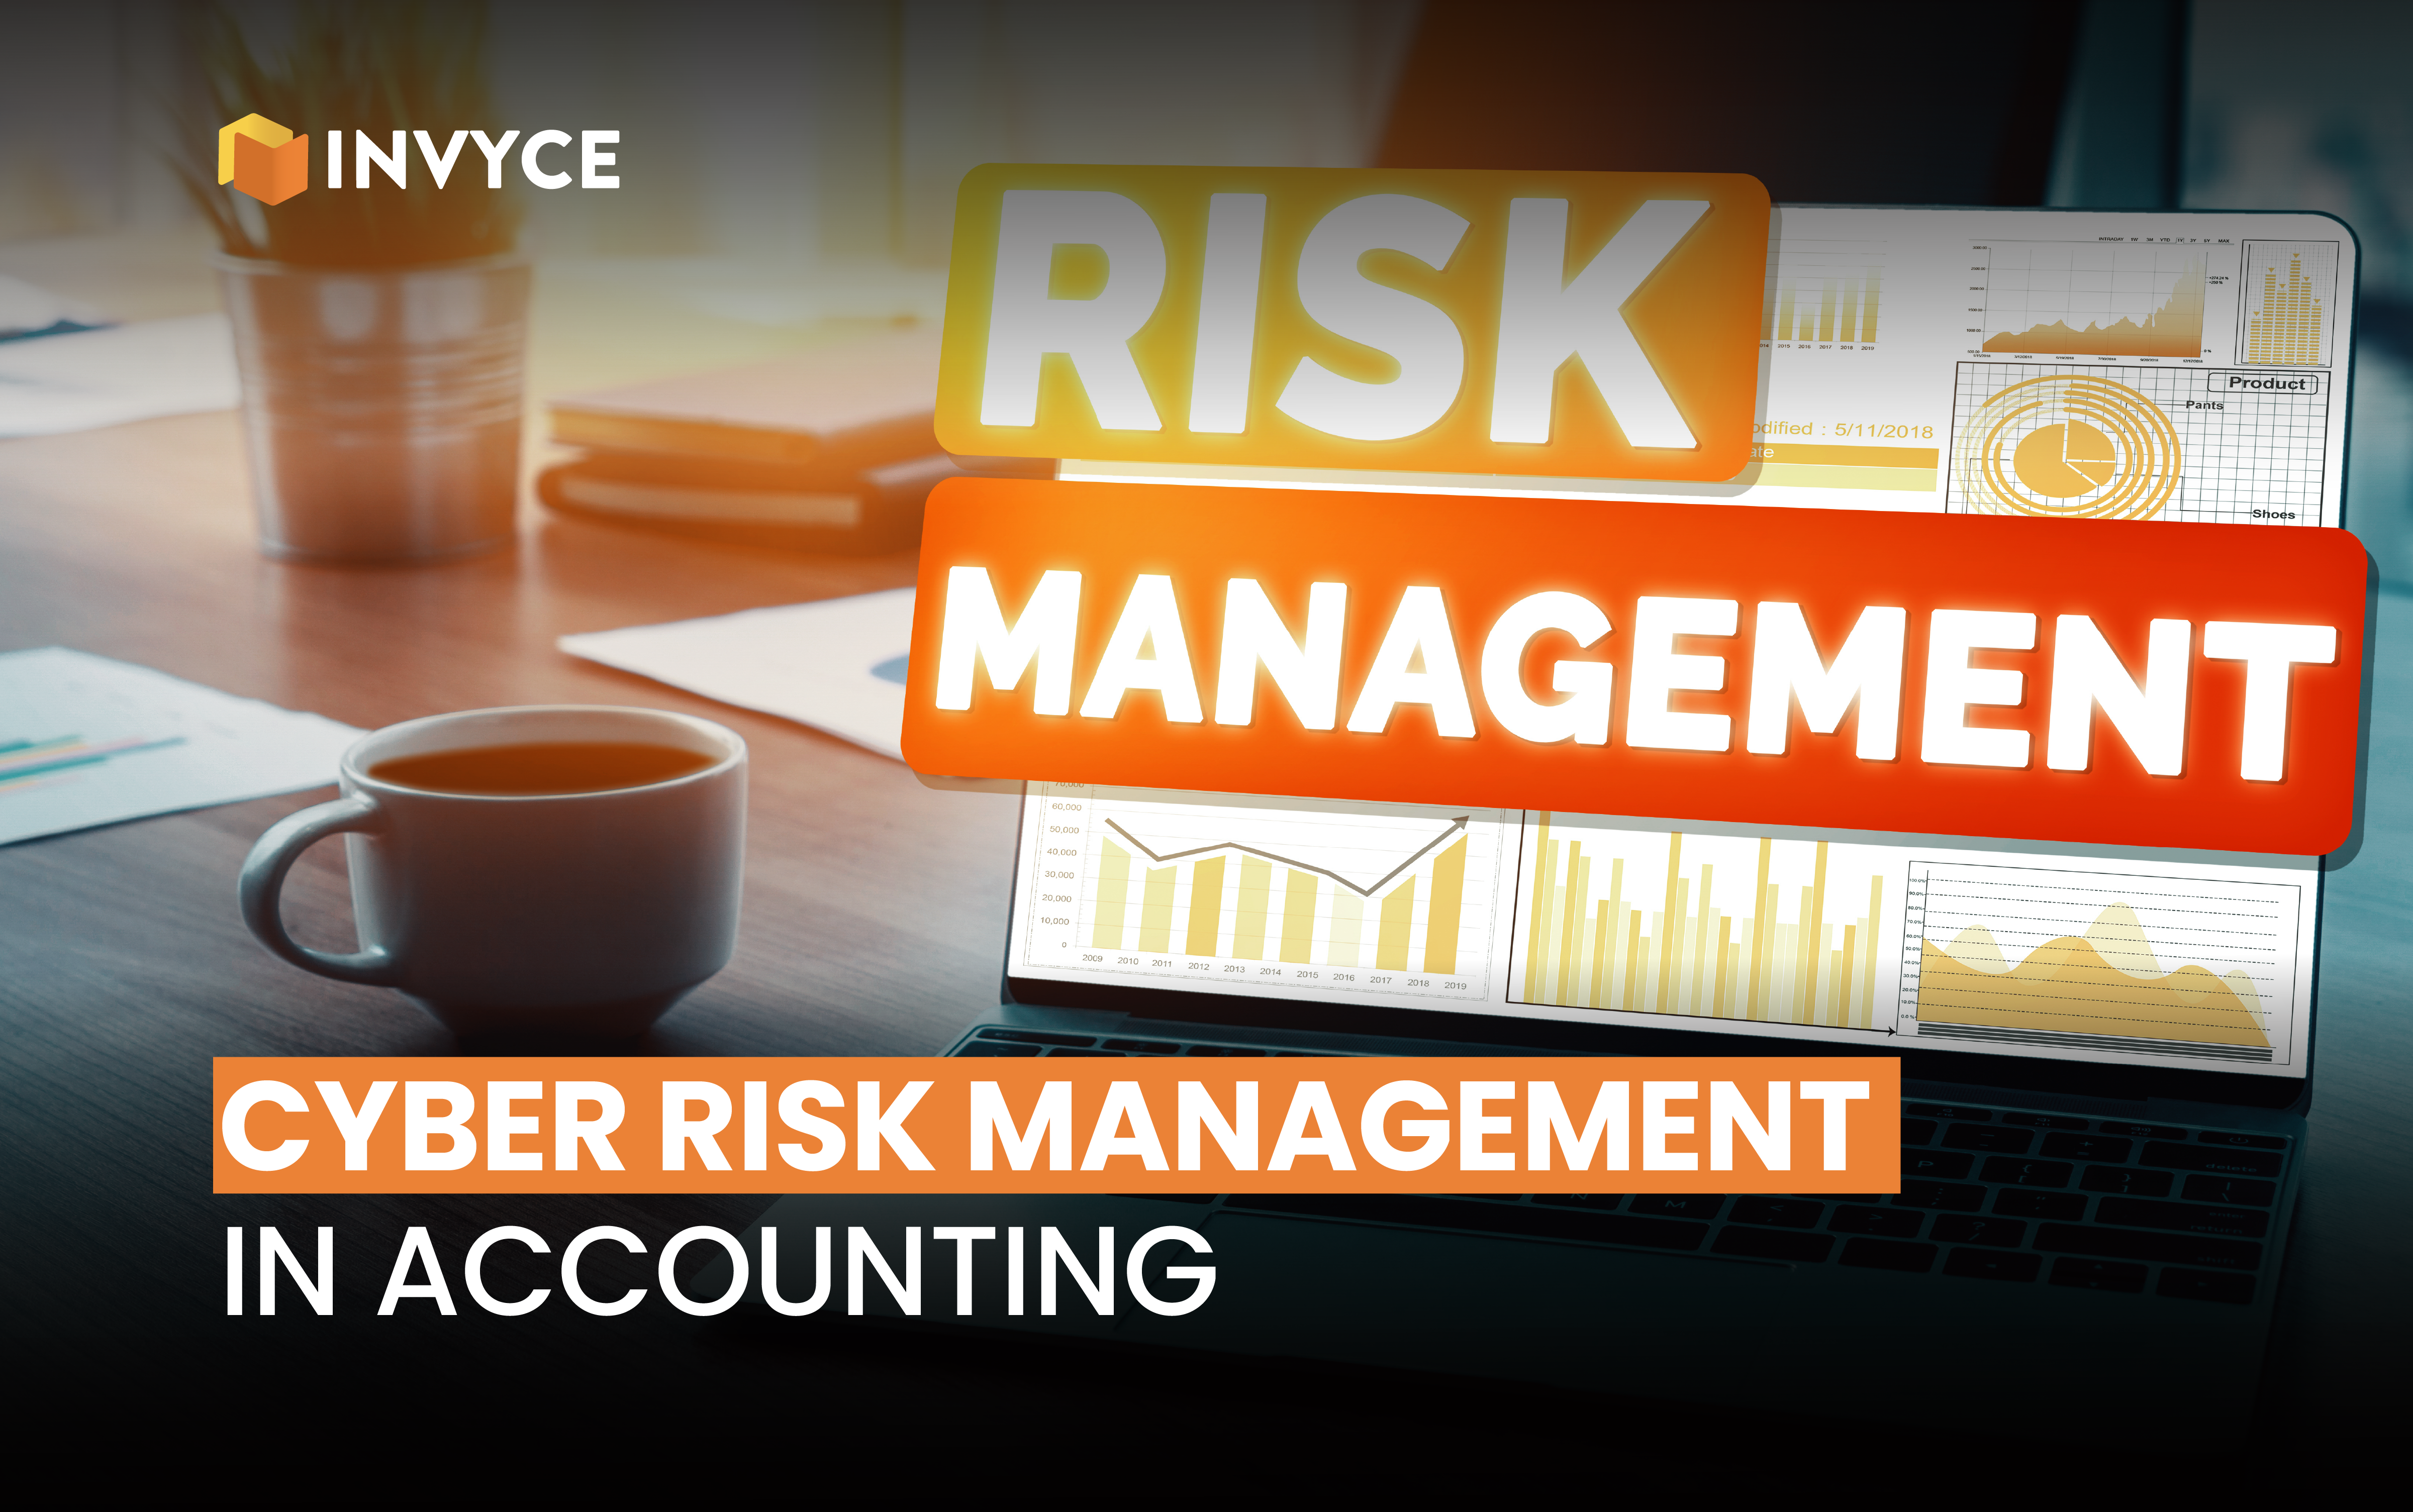 #Cyber Risk Management in Accounting